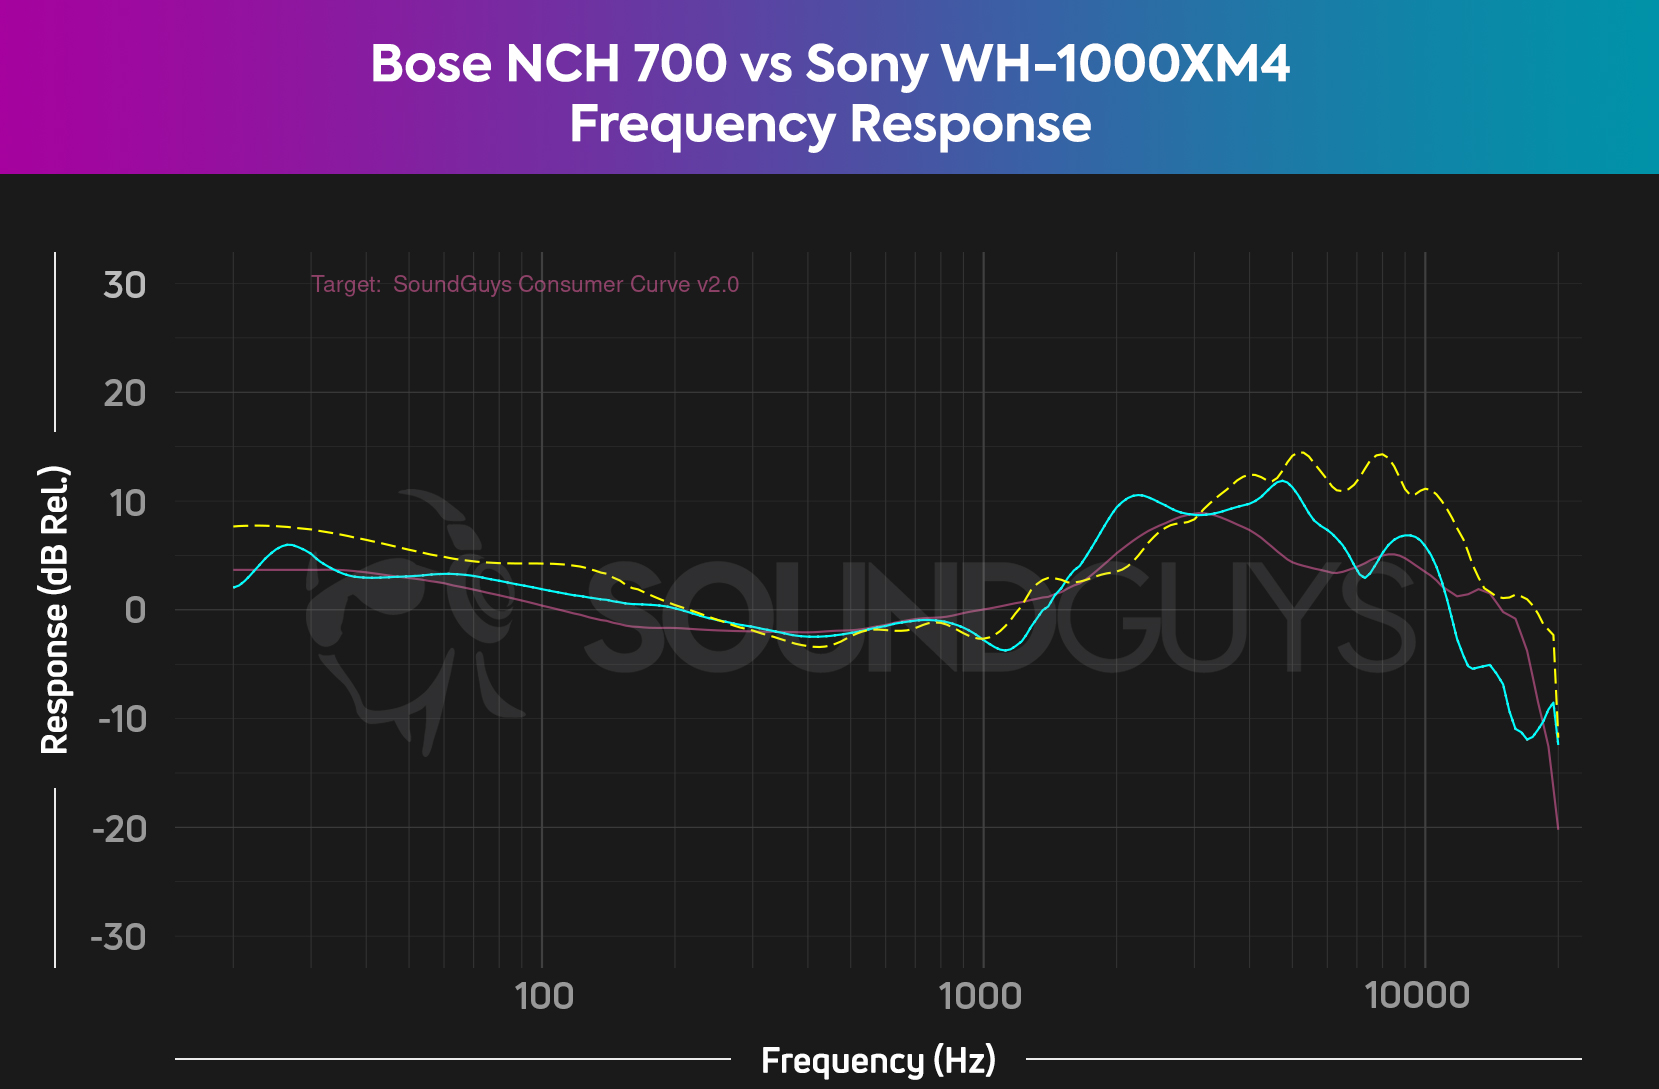 A chart compares the Bose Noise Canceling Headphones 700 and Sony WH-1000XM4 frequency responses against the SoundGuys Consumer Curve V2, revealing that the Sony headset has a more bass-heavy sound.